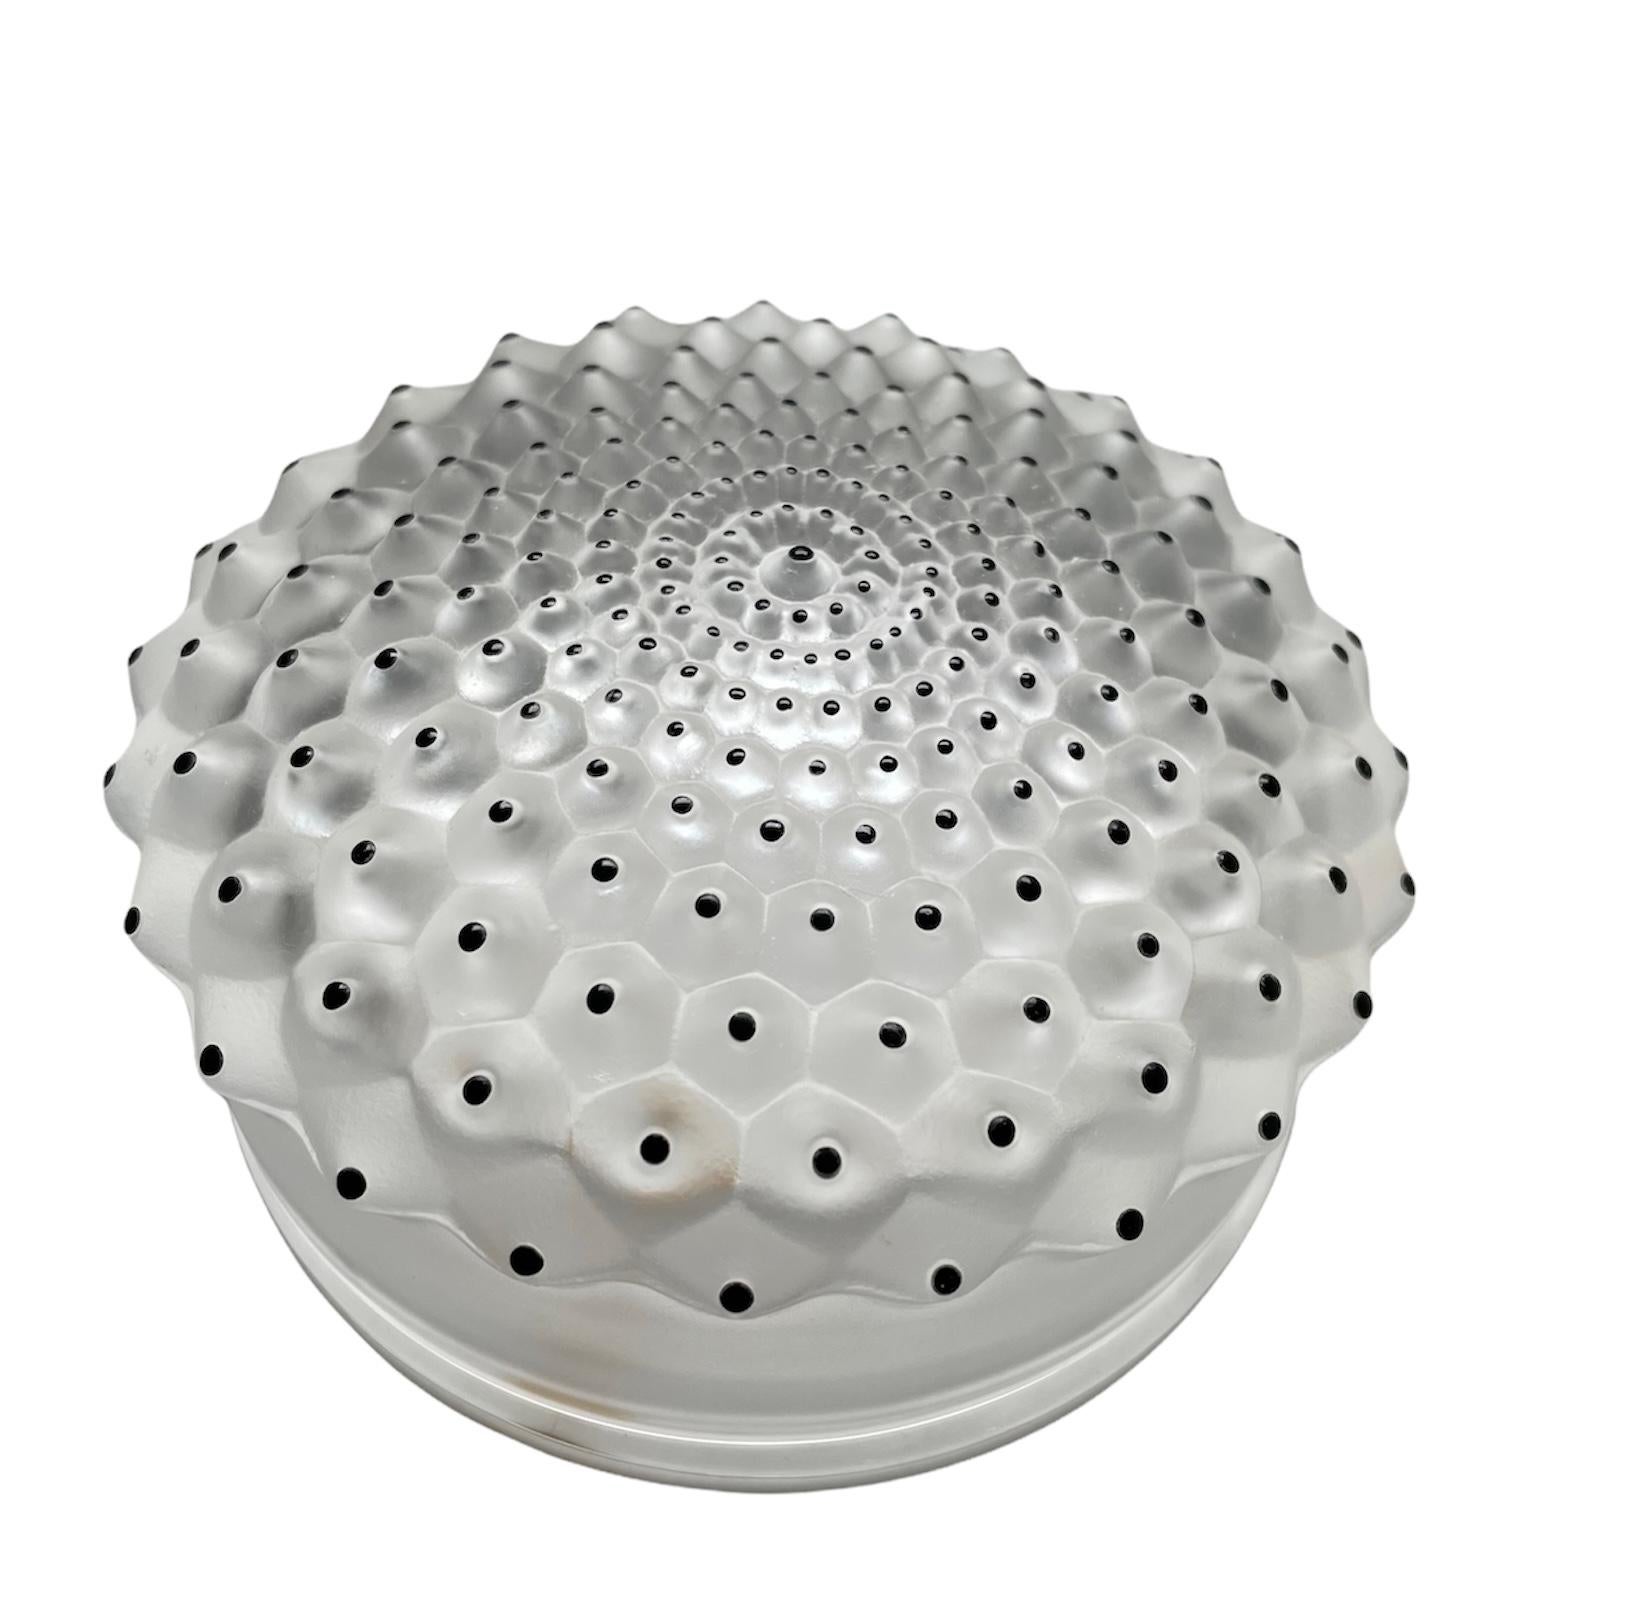 This is a Lalique Crystal Cactus vanity powder box. It depicts a round frosted crystal with a concave lid. Over it, you can see a cluster of frosted crystal lumps ending with black enamel dots. There is a Lalique France sticker in one of the side